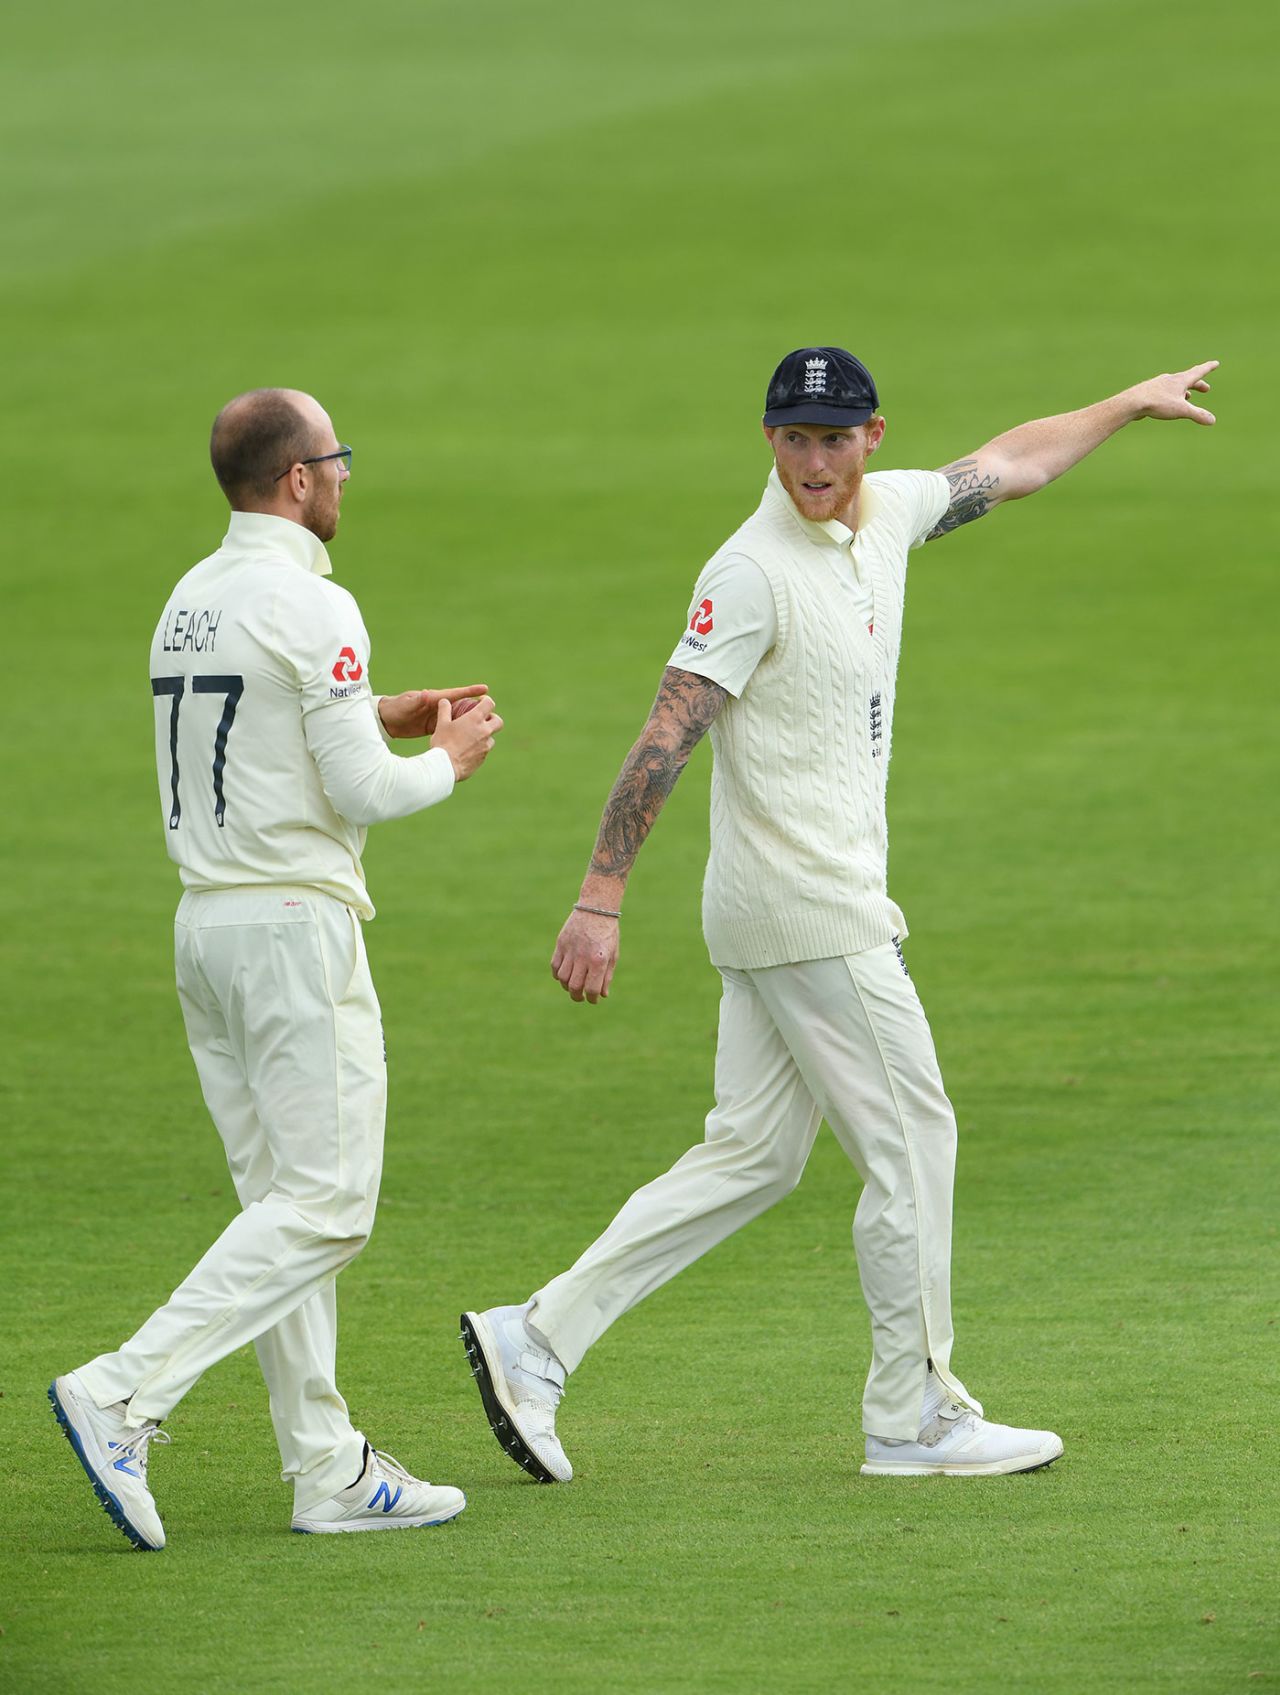 Ben Stokes and Jack Leach discuss the field, Team Stokes v Team Buttler, England intra-squad warm-up match, Day Three, Ageas Bowl, July 3, 2020